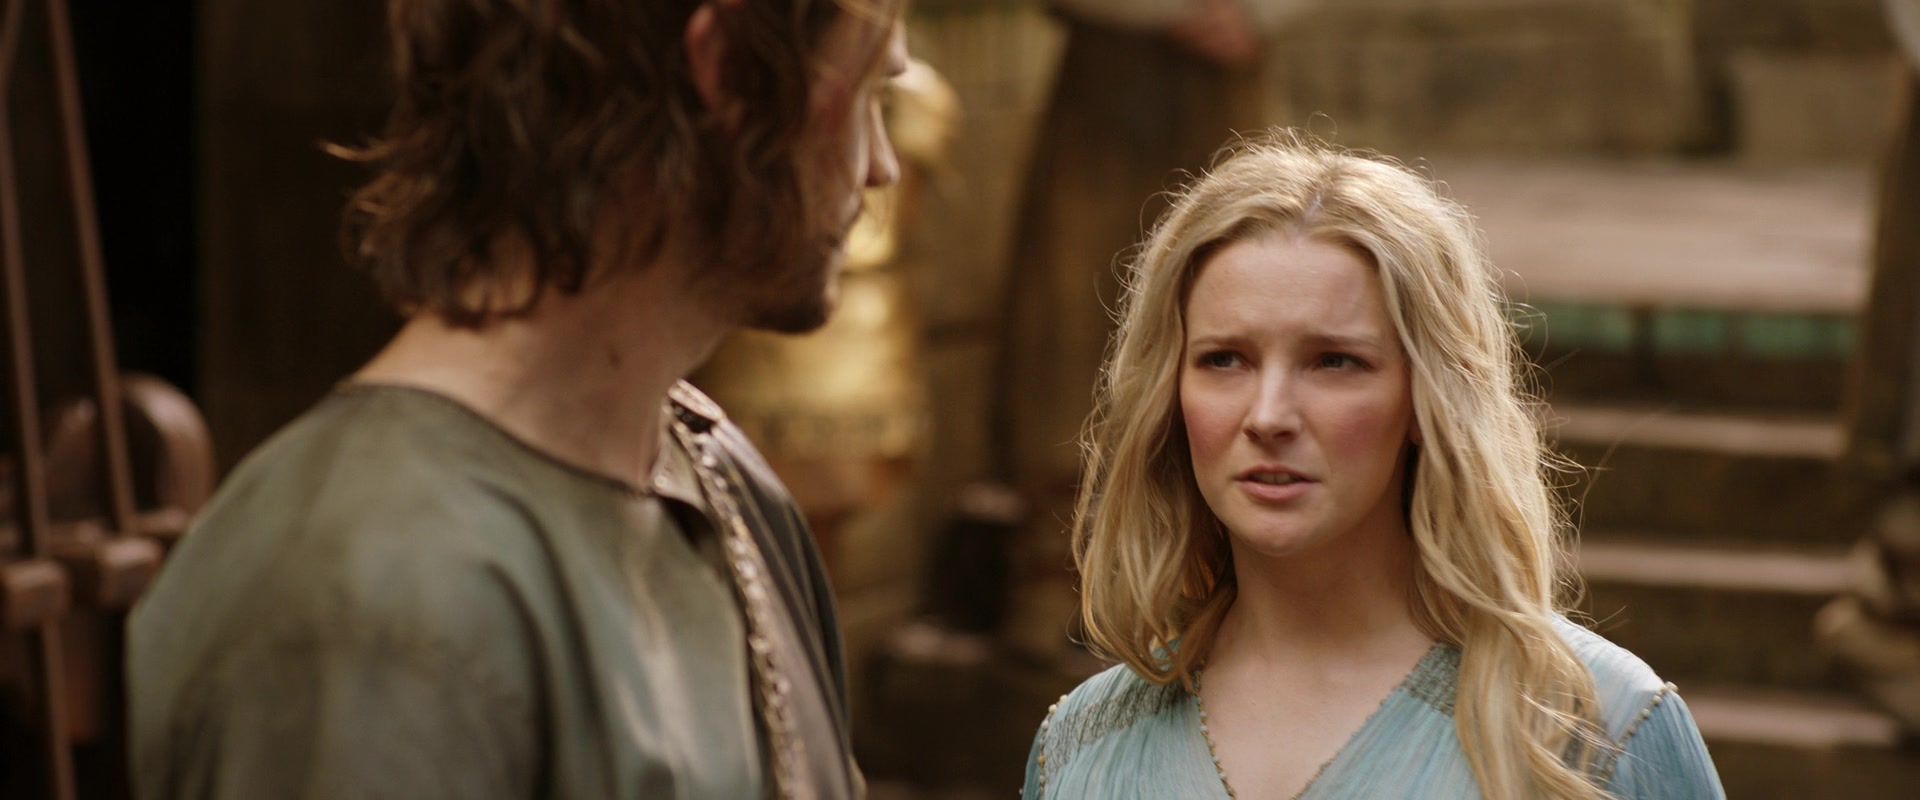 Galadriel (Morfydd Clark) dismisses Halbrand's (Charlie Vickers) concerns in The Lord of the Rings: The Rings of Power Season 1 Episode 5 "Parting" (2022), Amazon Studios